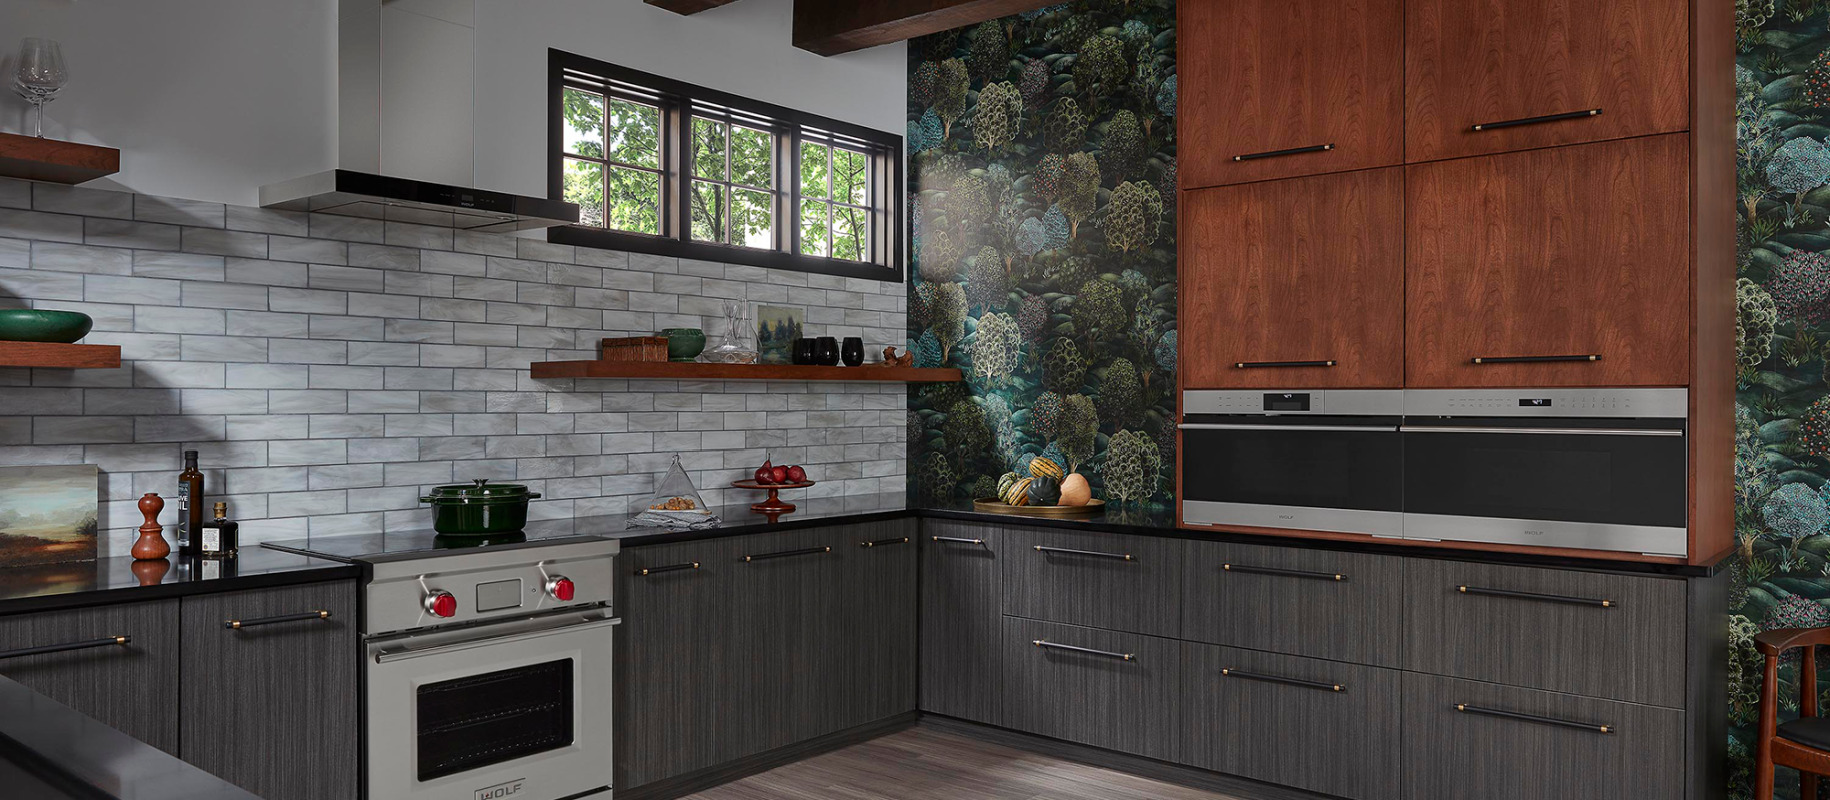 Showplace Introduces Innovative Trends and Textures for All Seasons